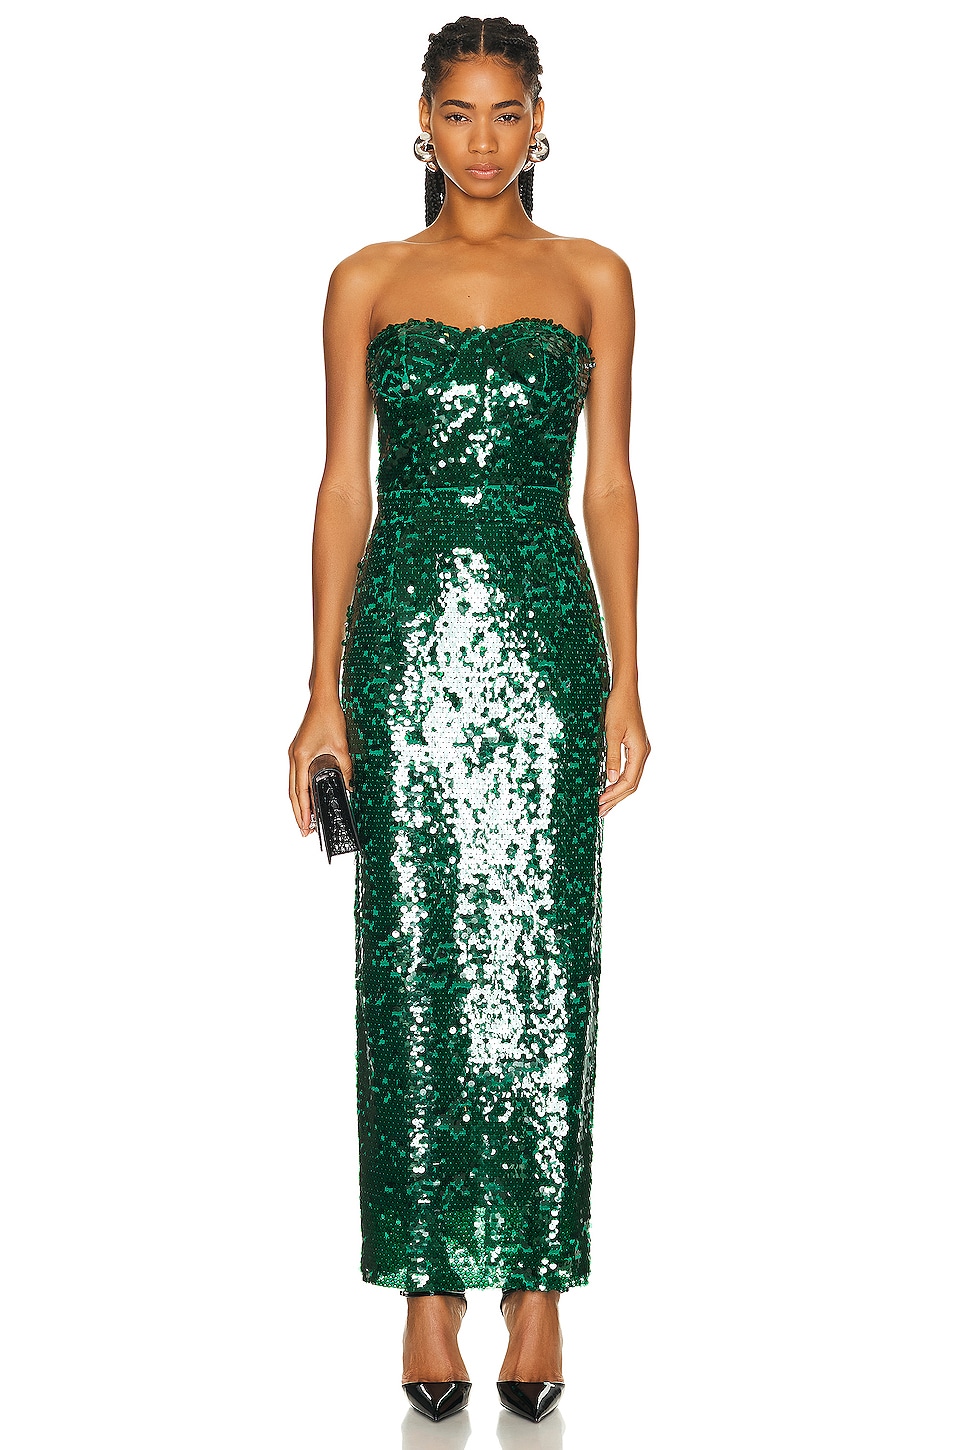 Image 1 of The New Arrivals by Ilkyaz Ozel Monique Strapless Dress in Vert Obscure